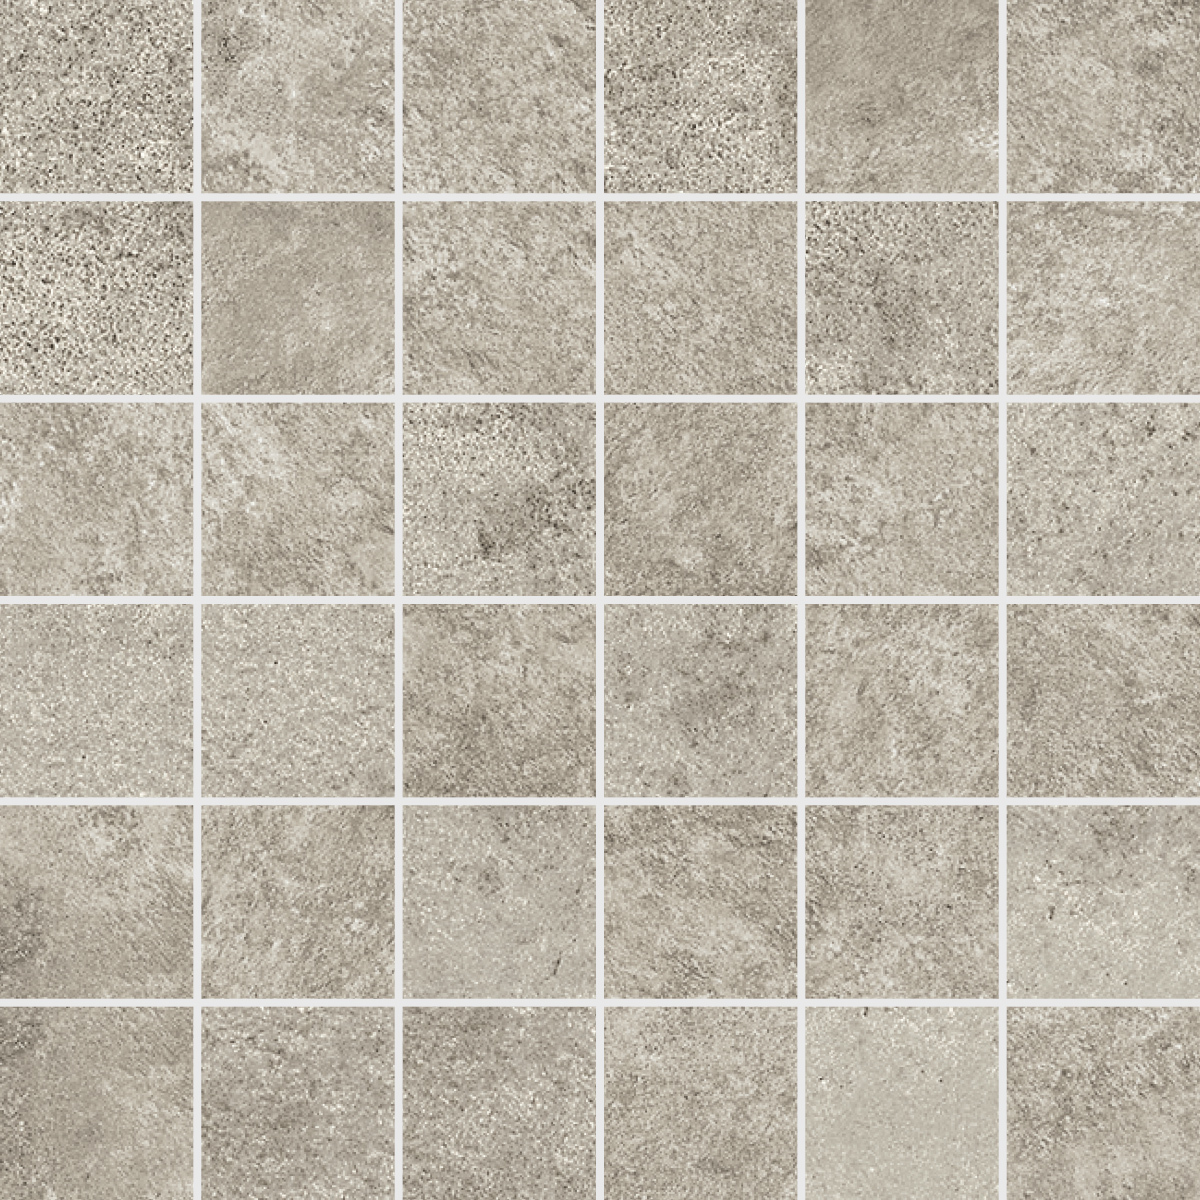 Novabell Overland Grigio Naturale Mosaic 5x5 OVD115K 30x30cm